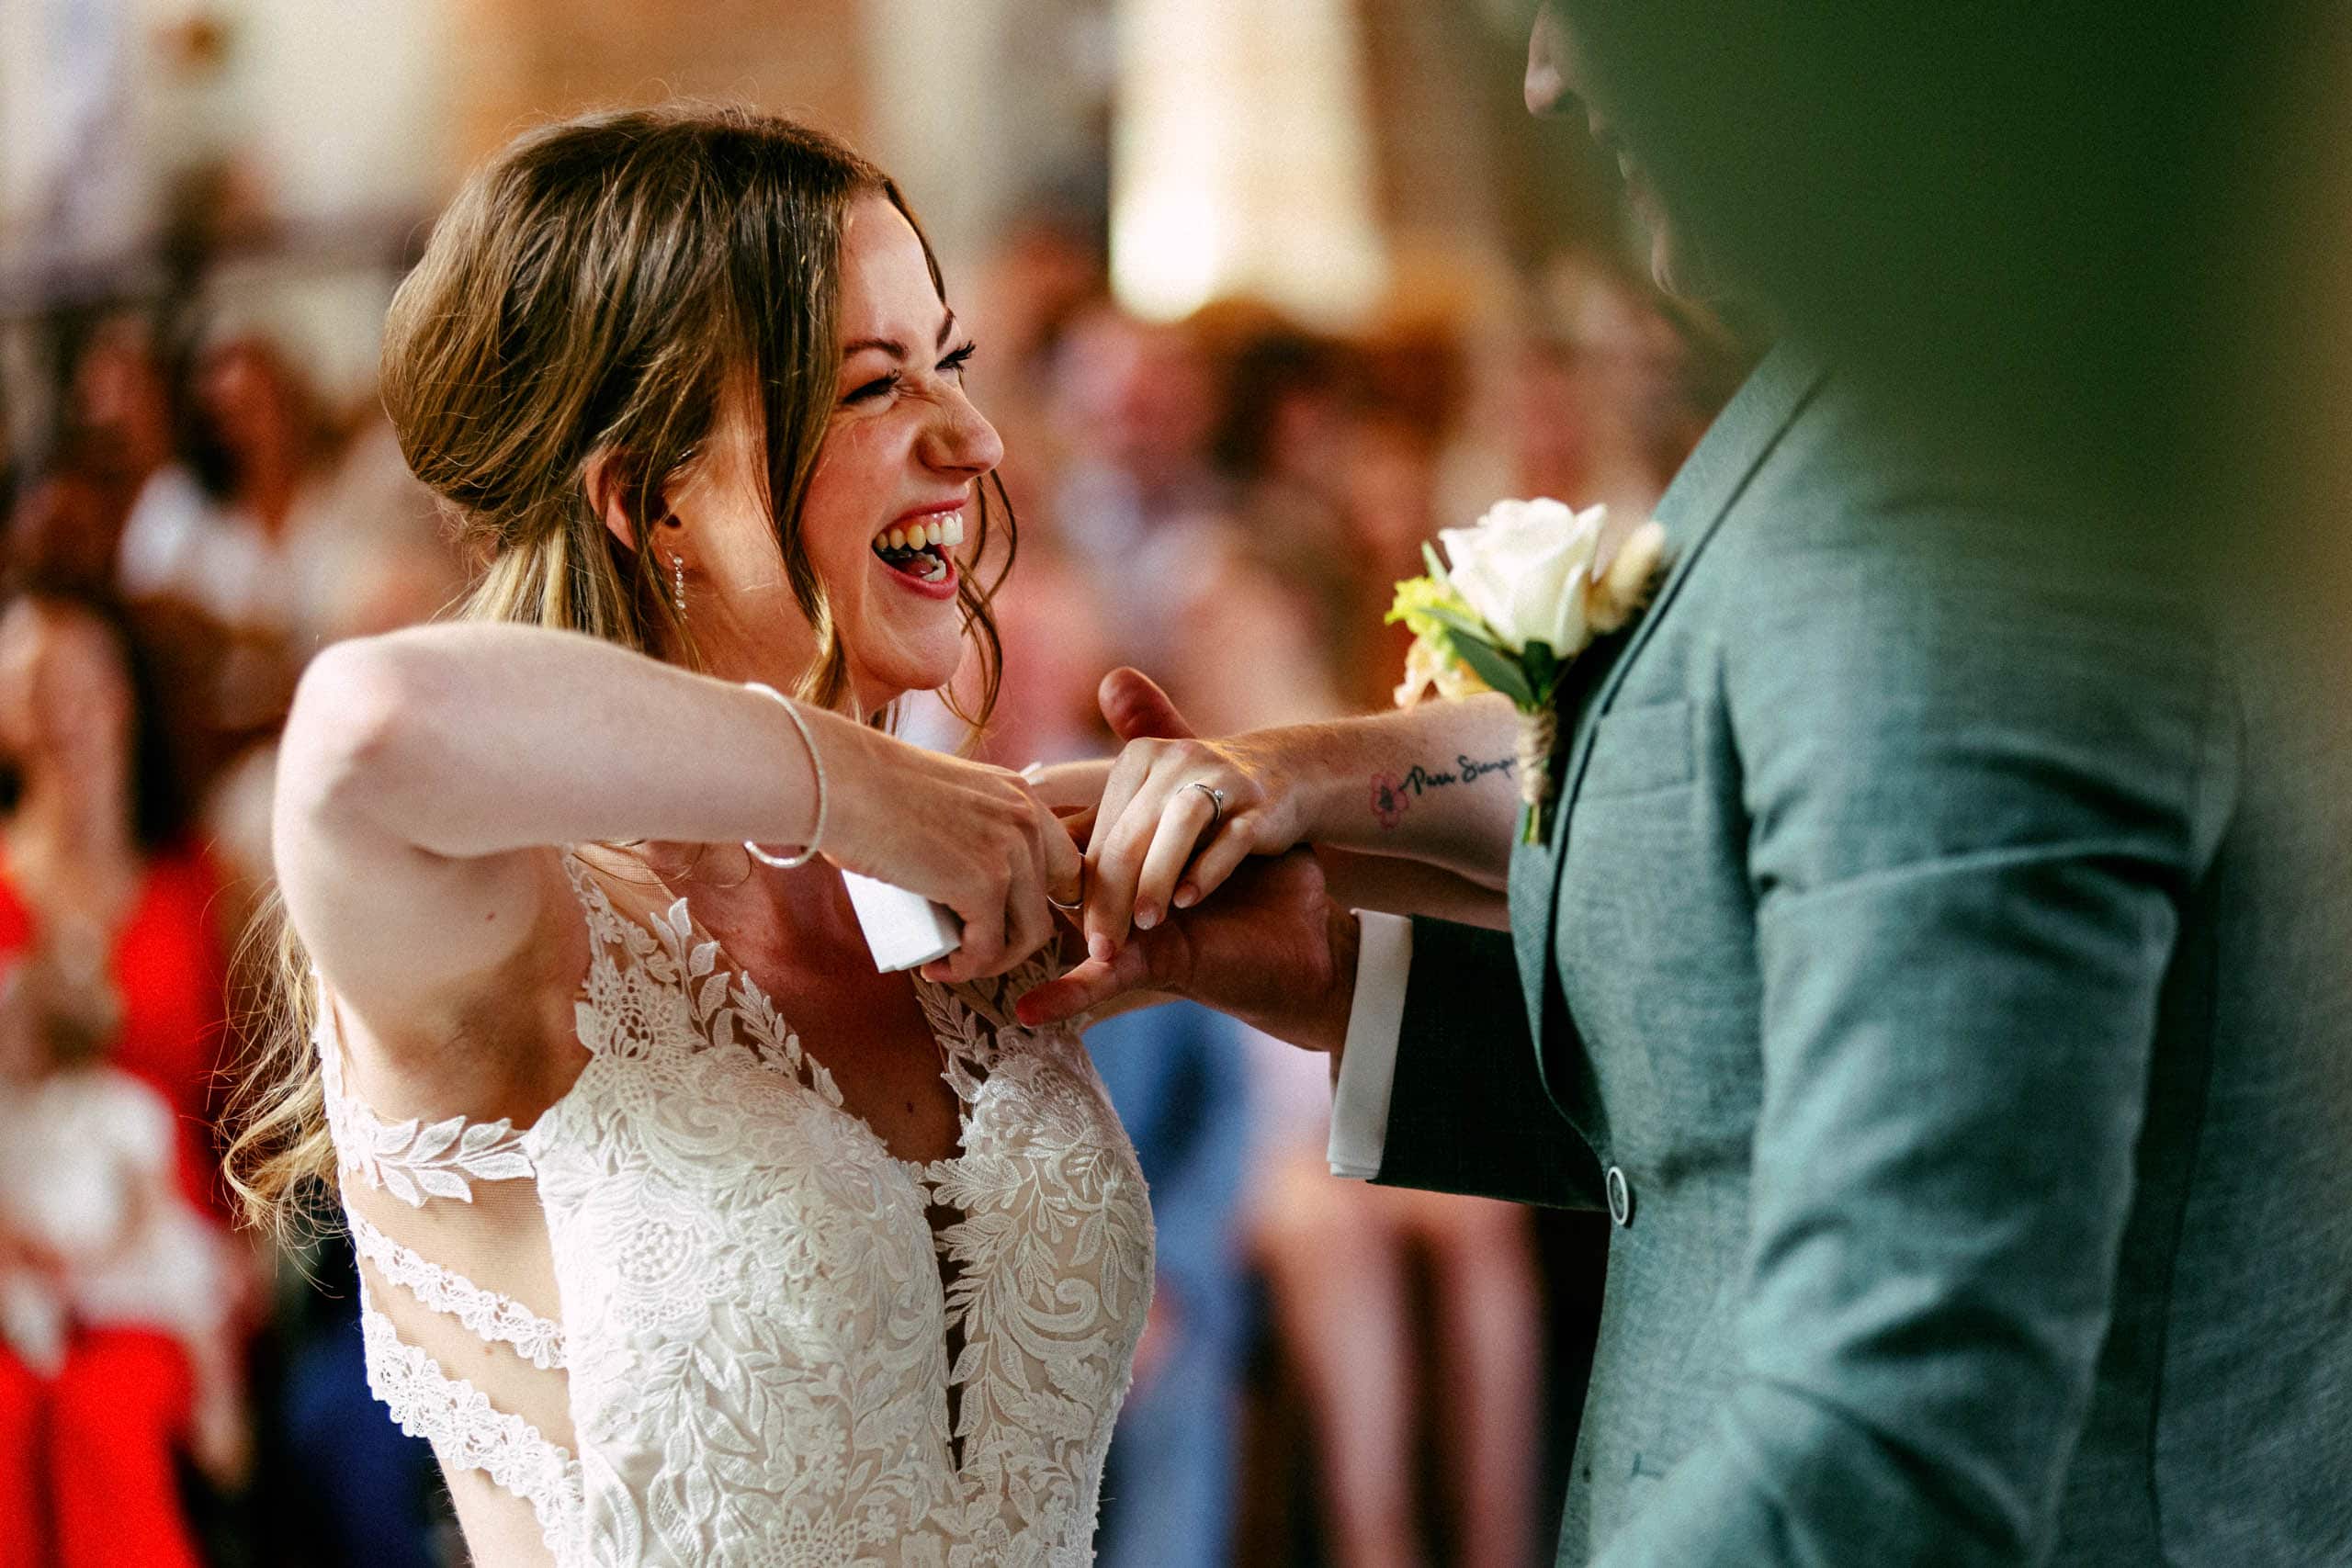 Extraordinary wedding photos of a smiling couple during their first dance.